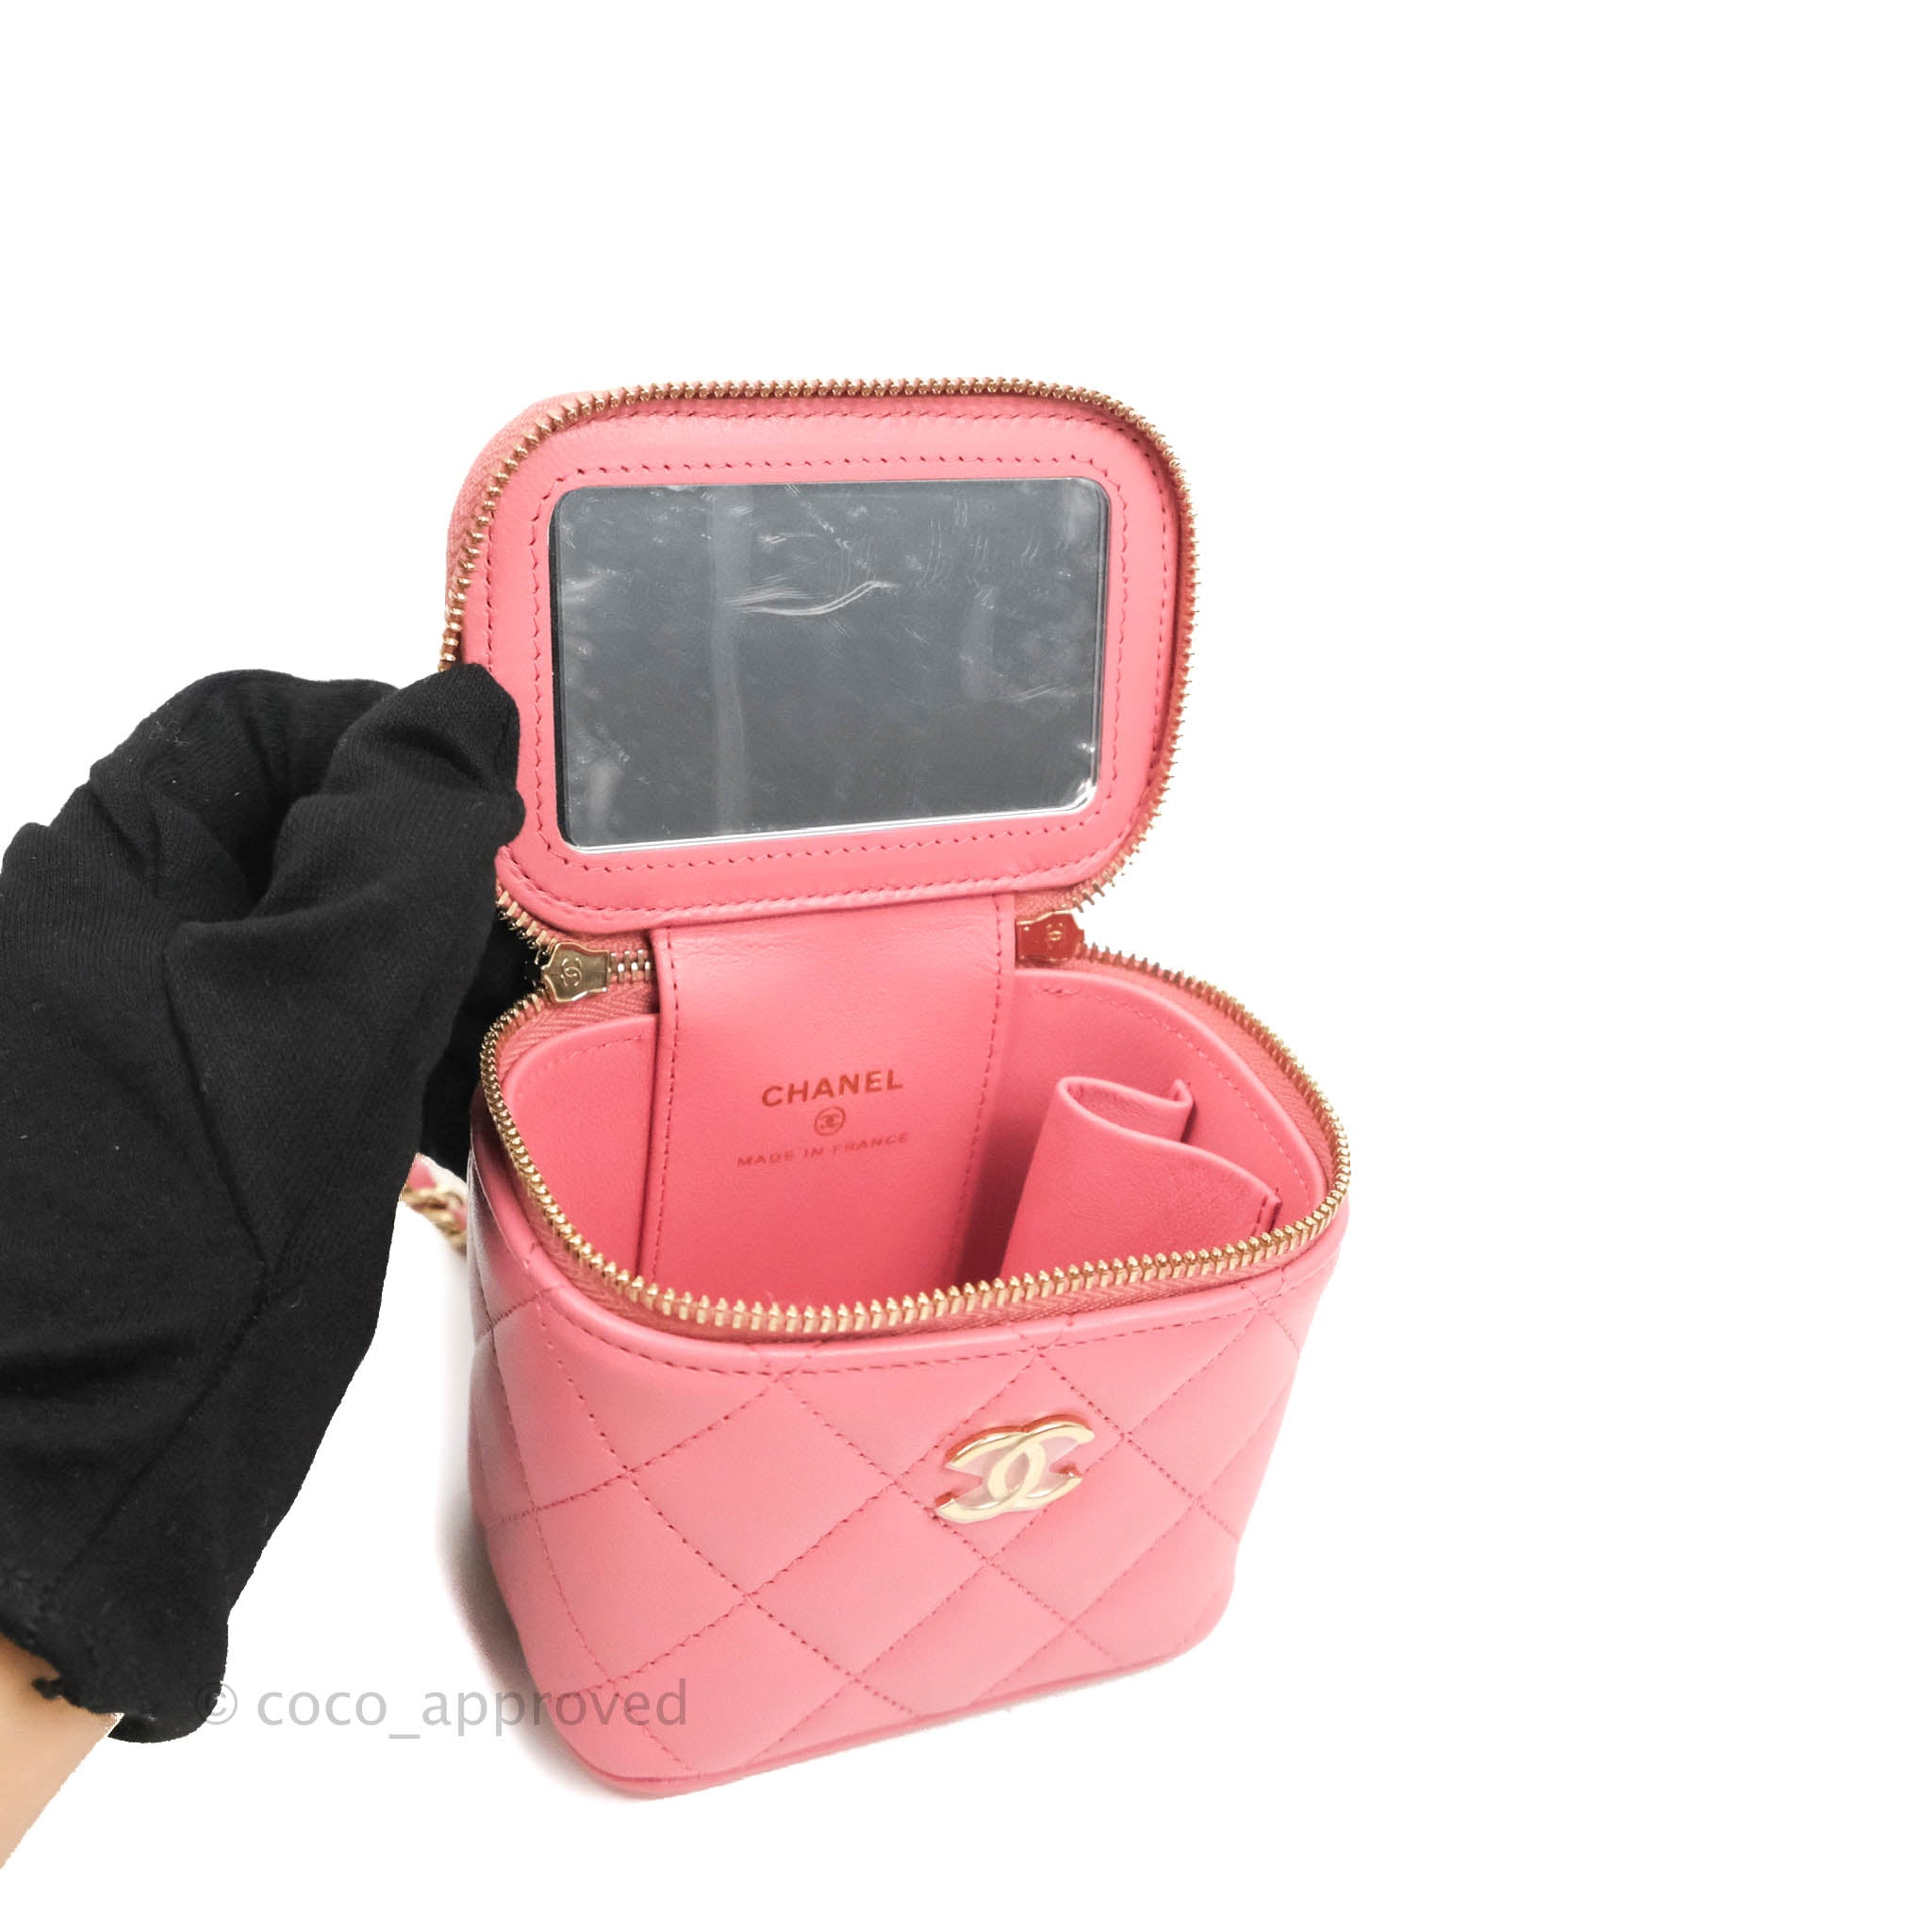 Chanel's Mini Vanity Case Bag Fits In One Hand & Reminds Us That